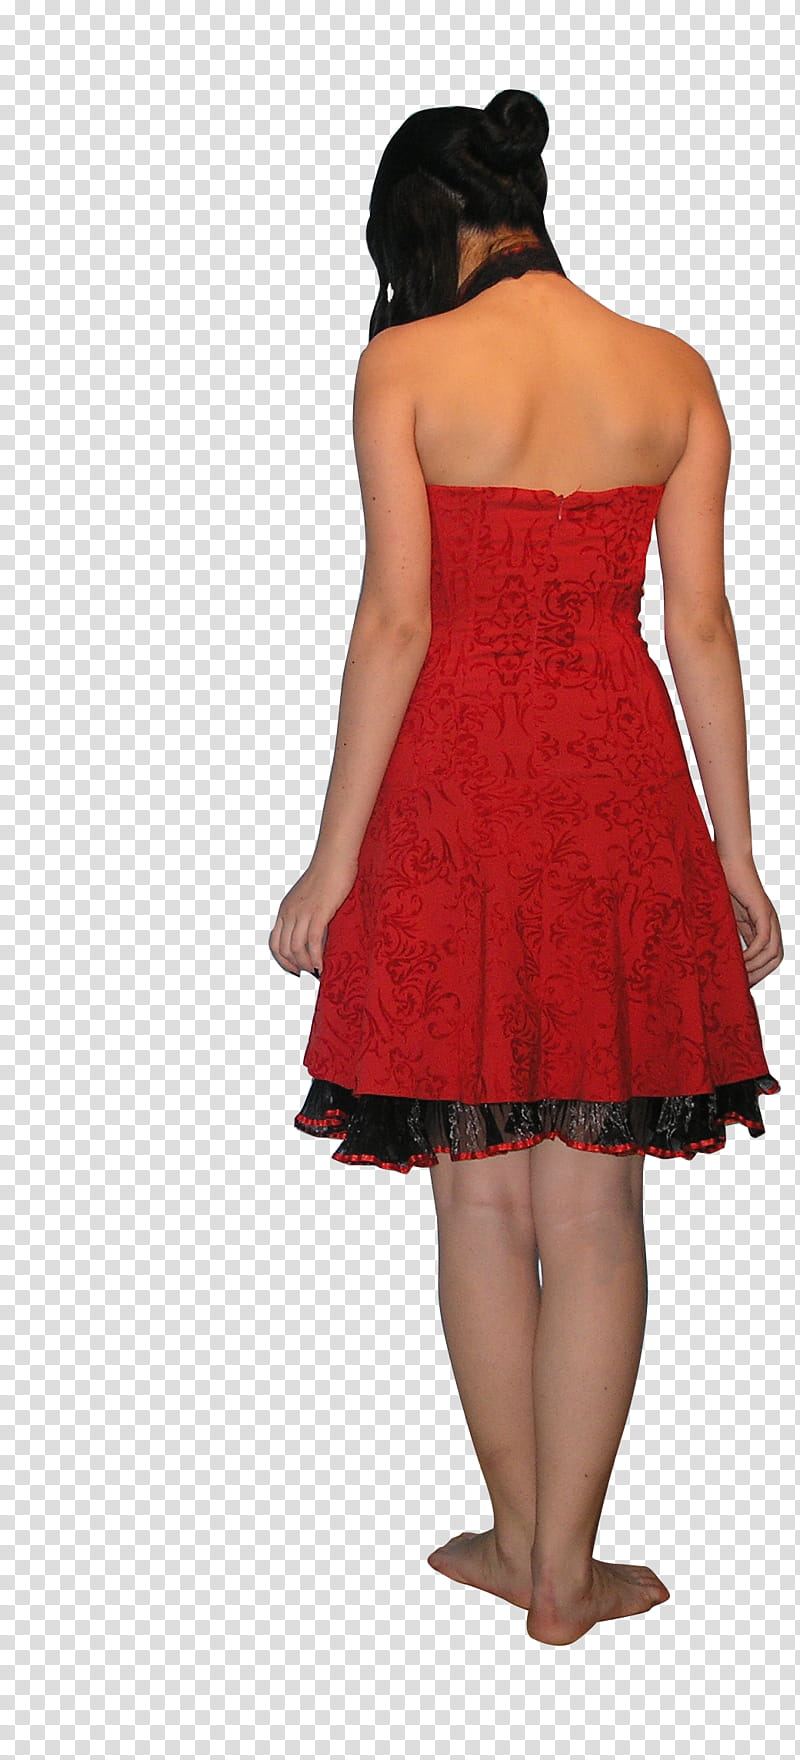 Noree Heart , woman in red and black halter open-back dress transparent background PNG clipart